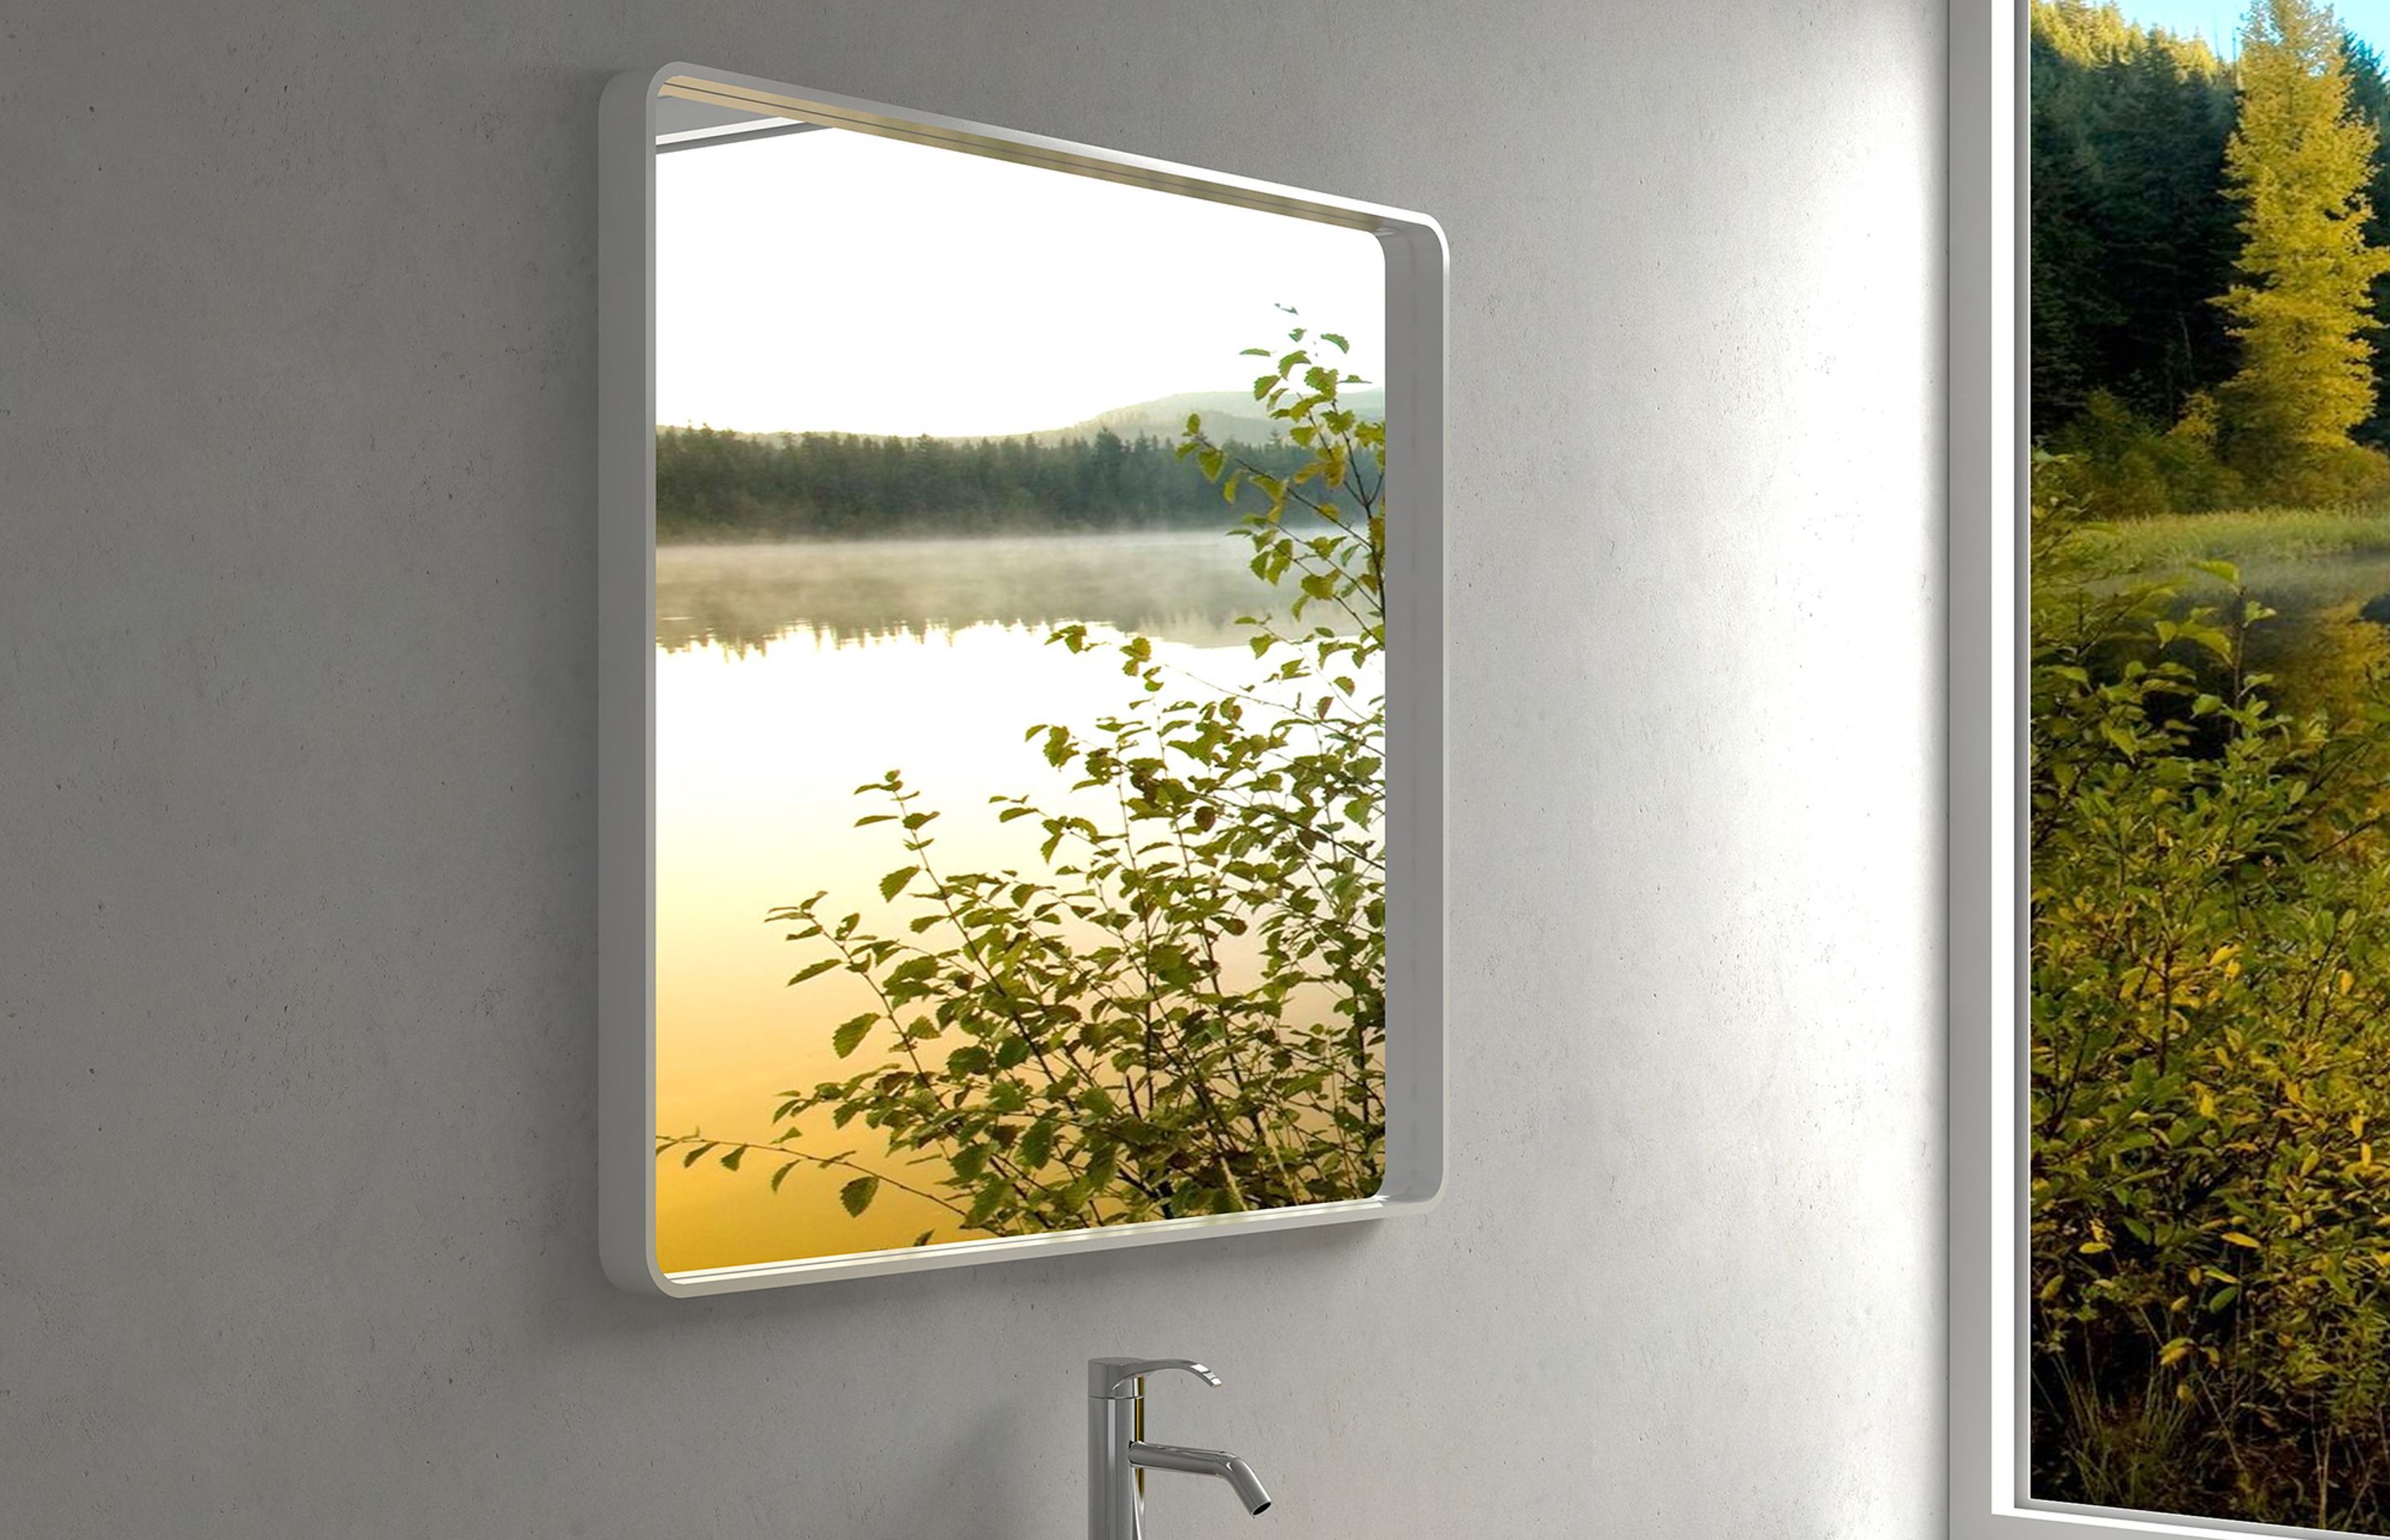 Functional items such as mirrors are now also used to make a design statement